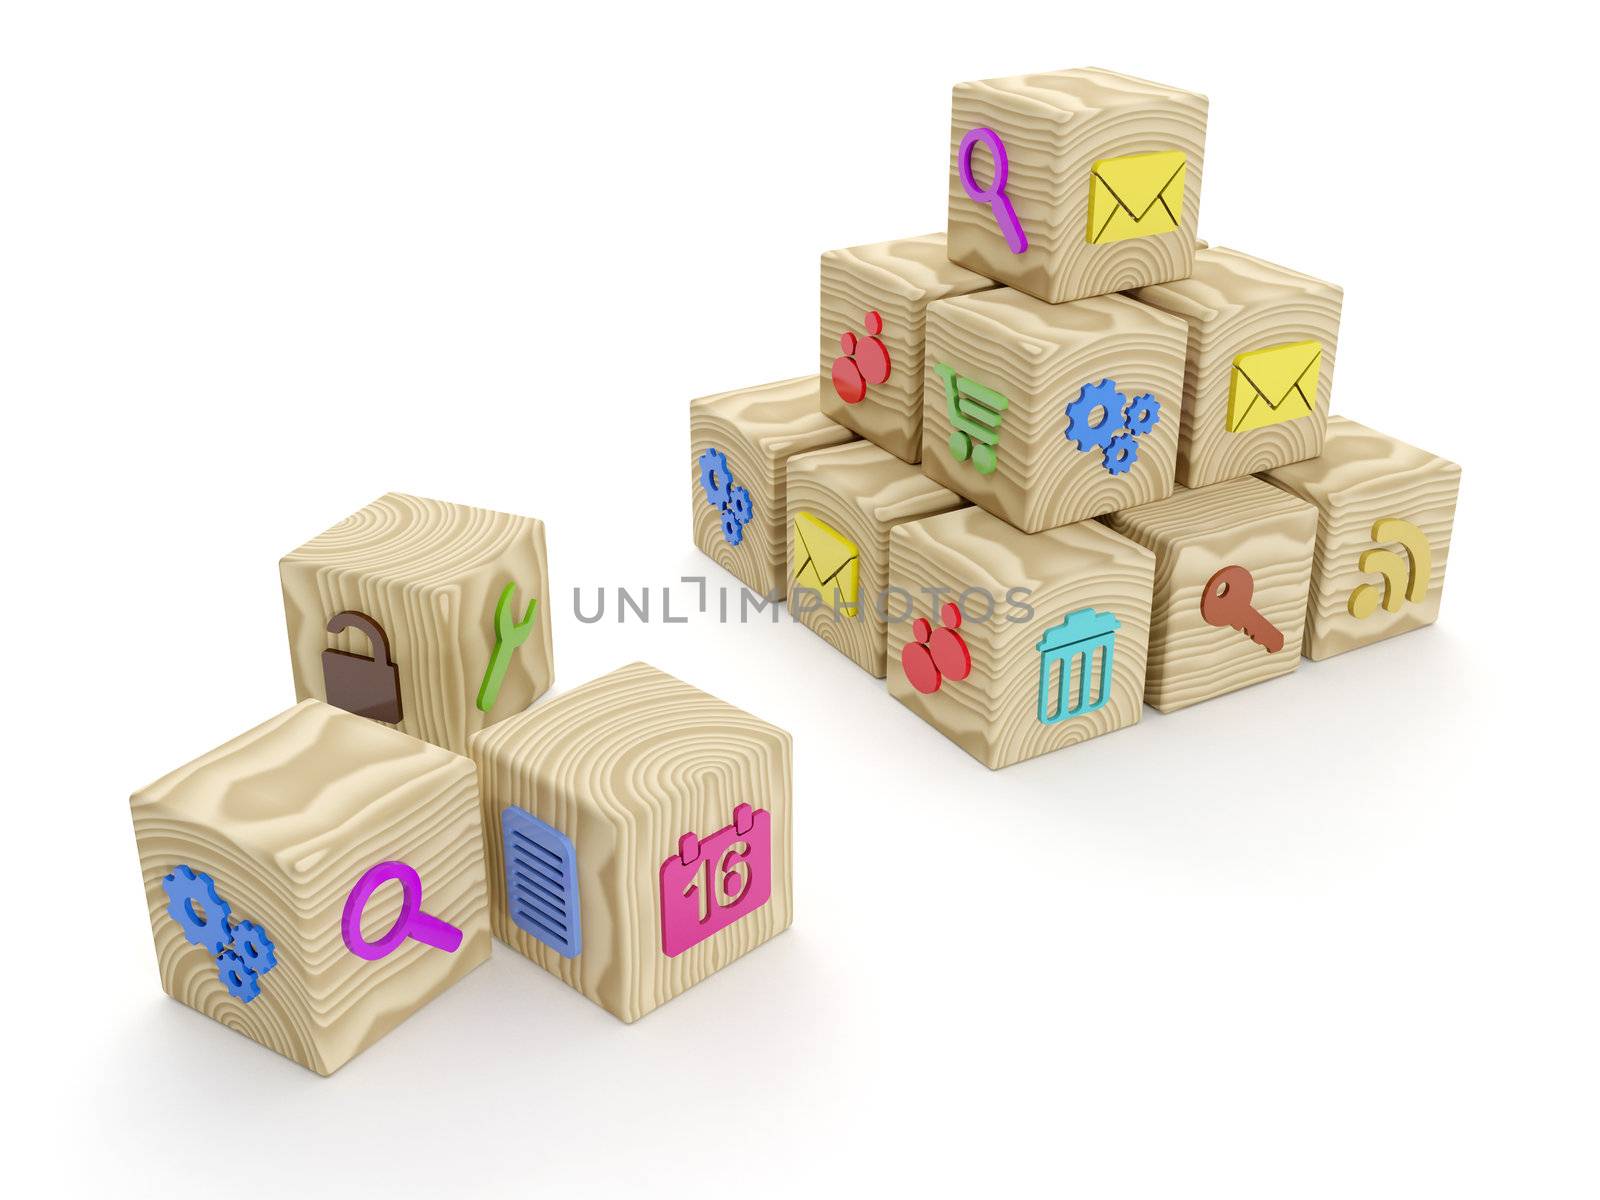 3d illustration: A group of wooden blocks, the mobile will by kolobsek